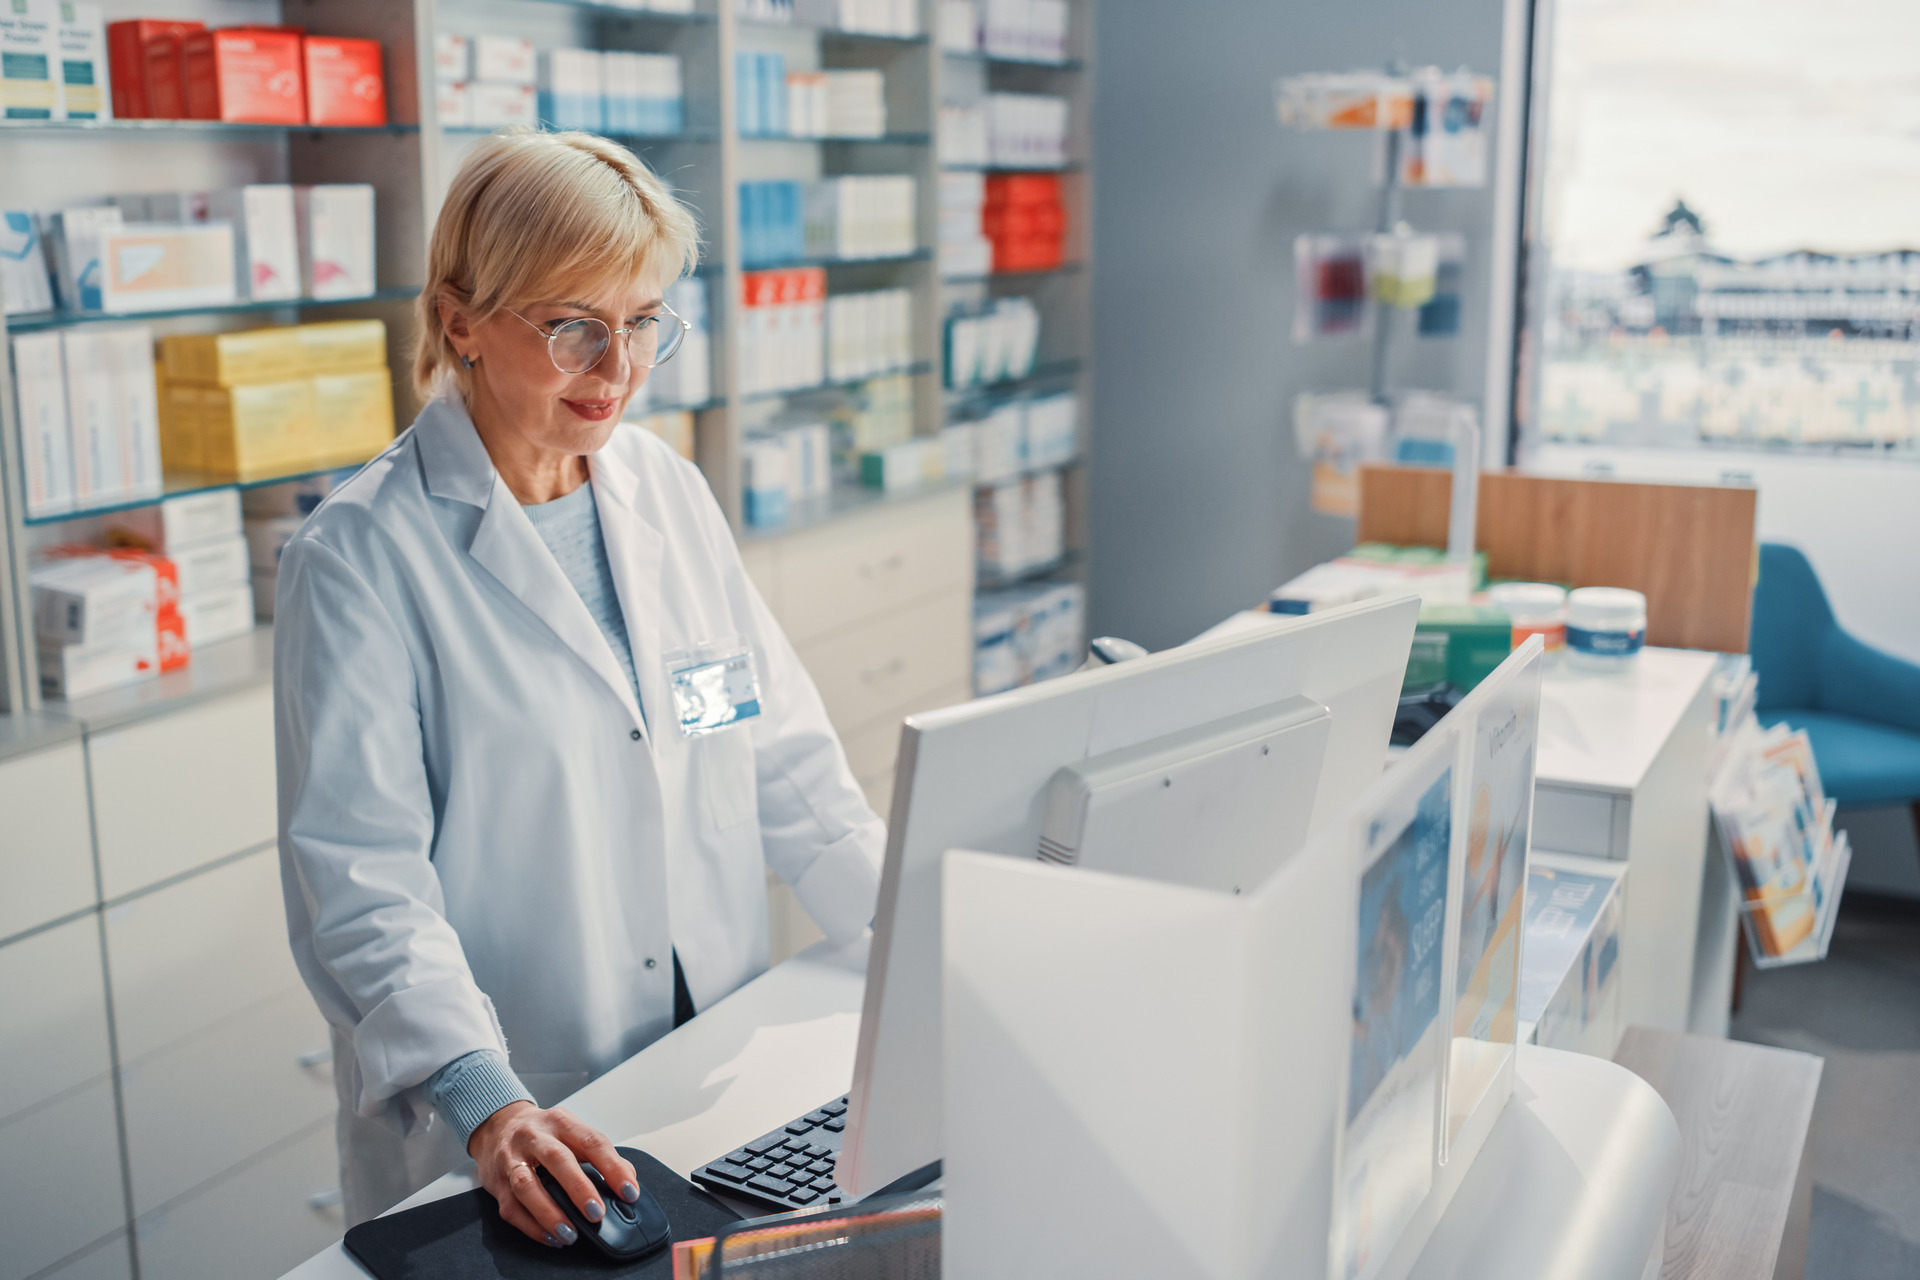 Pharmacist at a drugstore checkout counter, using a computer to check stock inventory of medicine, drugs, vitamins, and health care products.